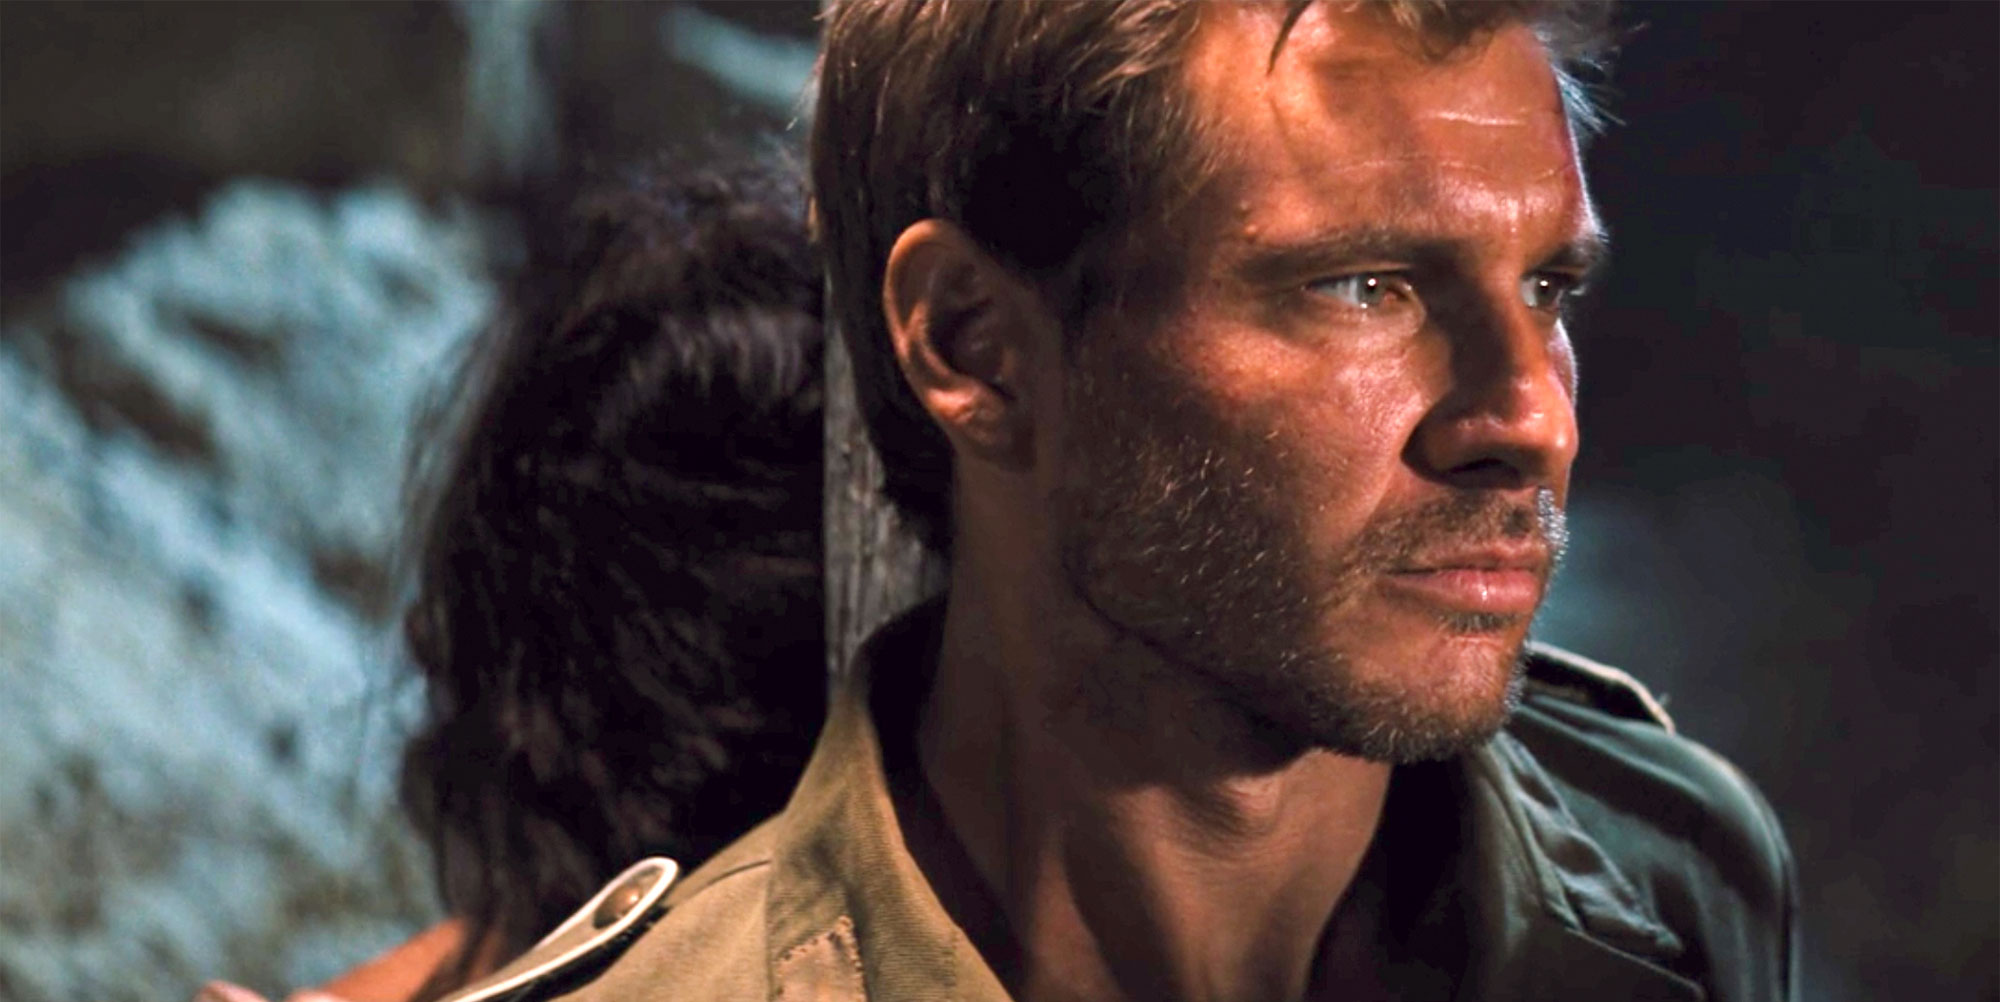 What Indiana Jones can teach us during hard times